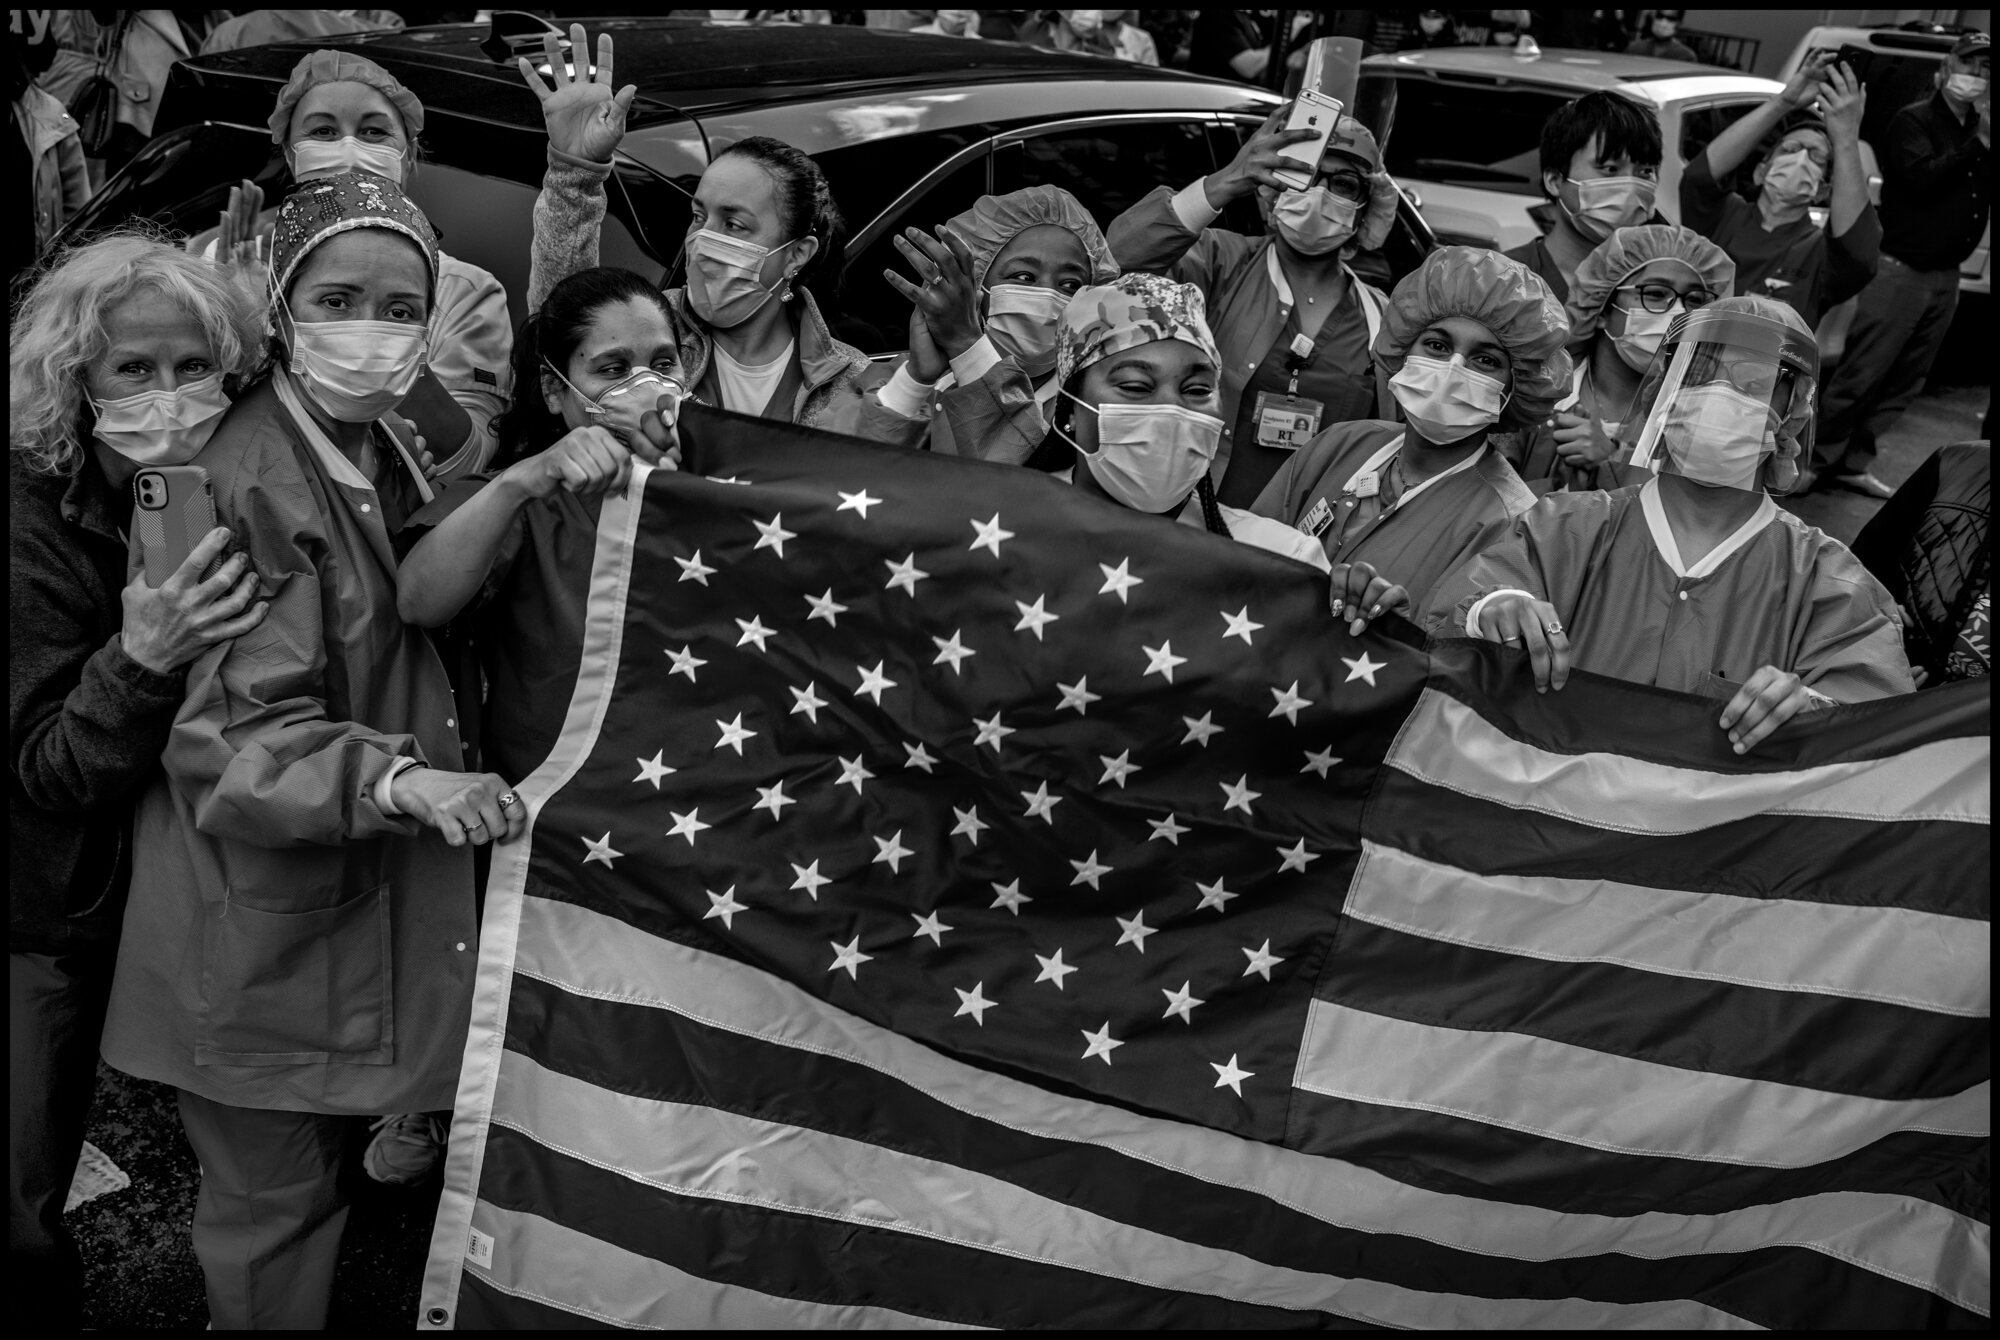  Lenox Hill Hospital Nurses with a US flag at 7pm.  May 1, 2020. © Peter Turnley.   ID# 36-010 